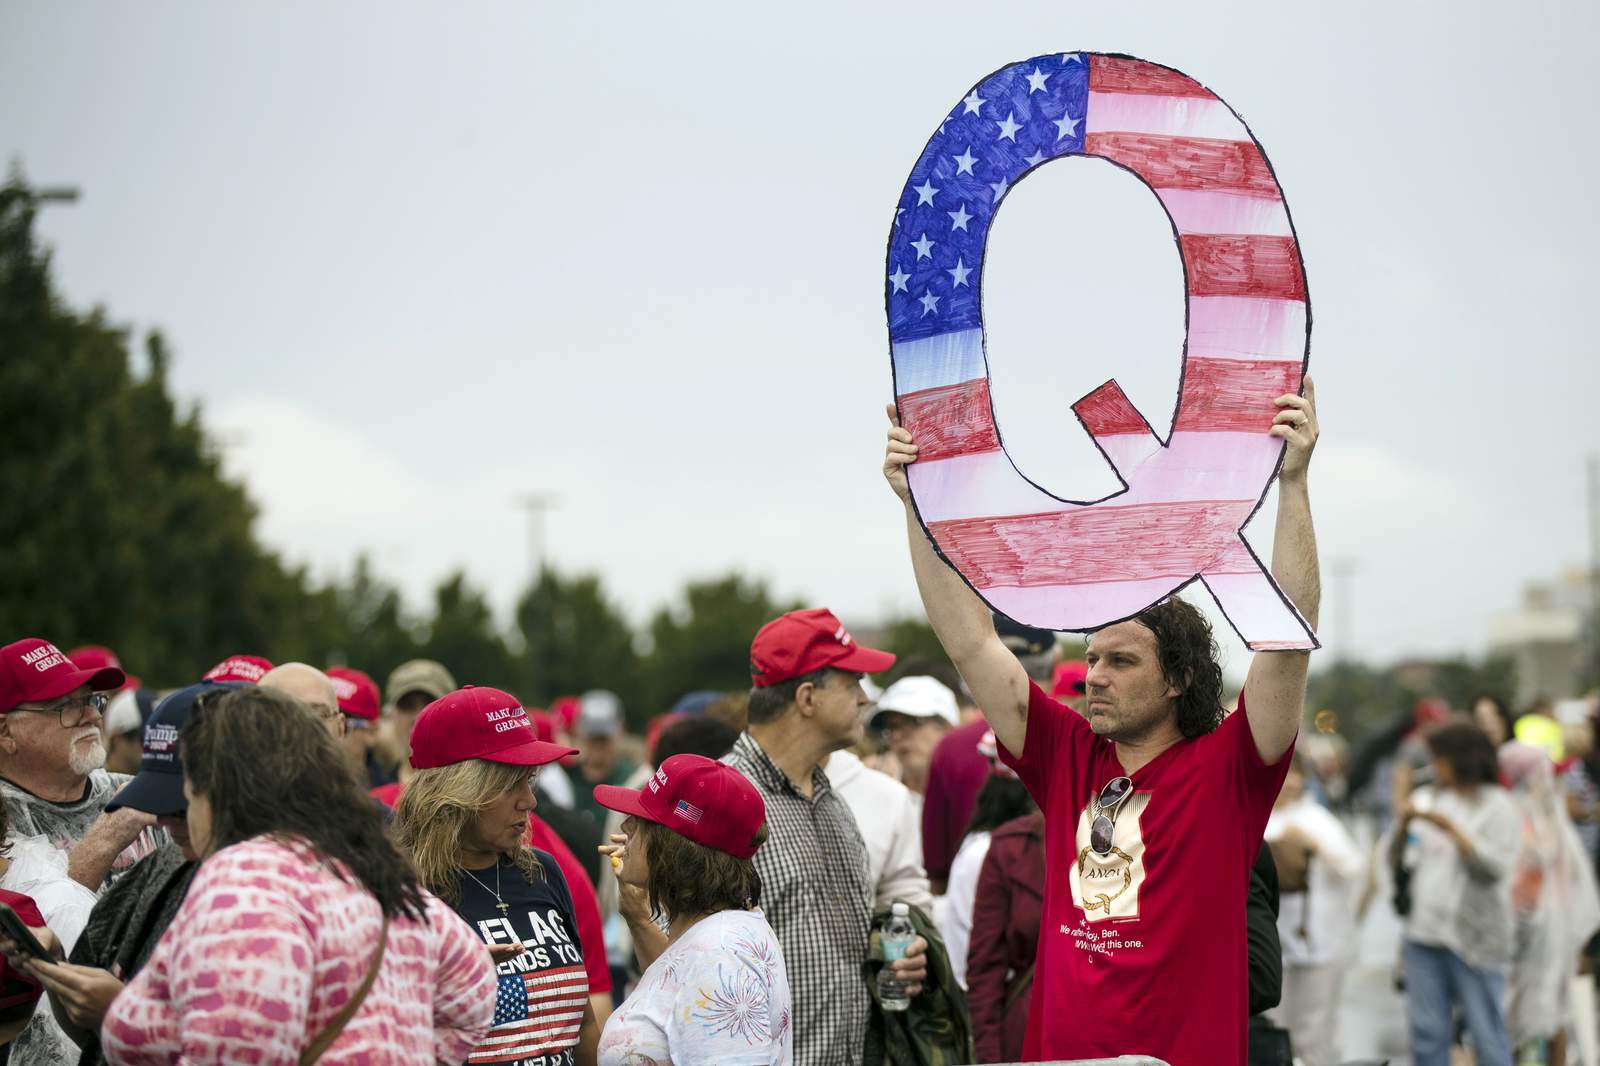 Facebook says it will ban groups for ‘representing’ QAnon